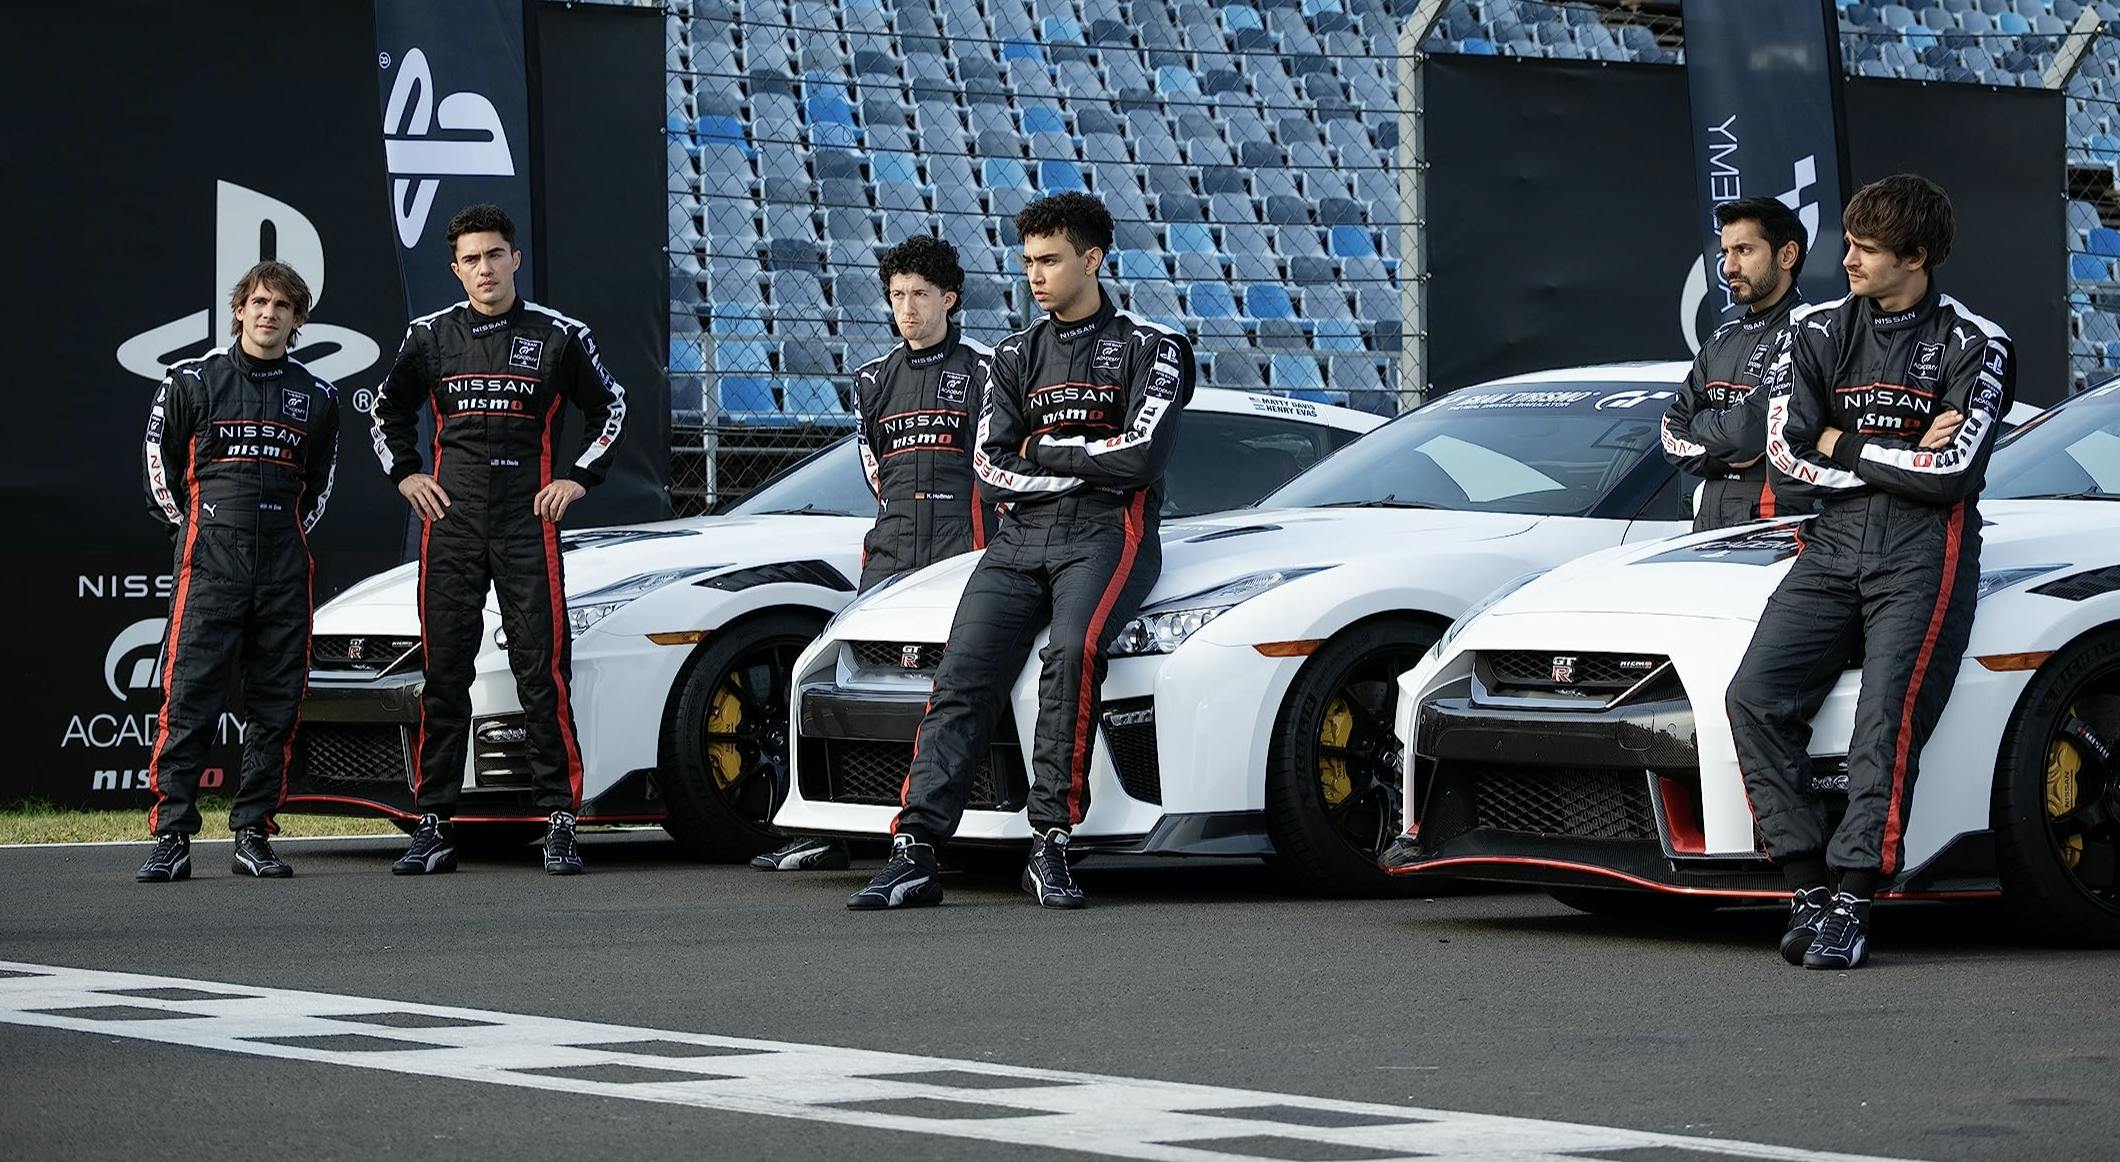 Nissan executive tells the real story behind the new Gran Turismo movie -  Hagerty Media